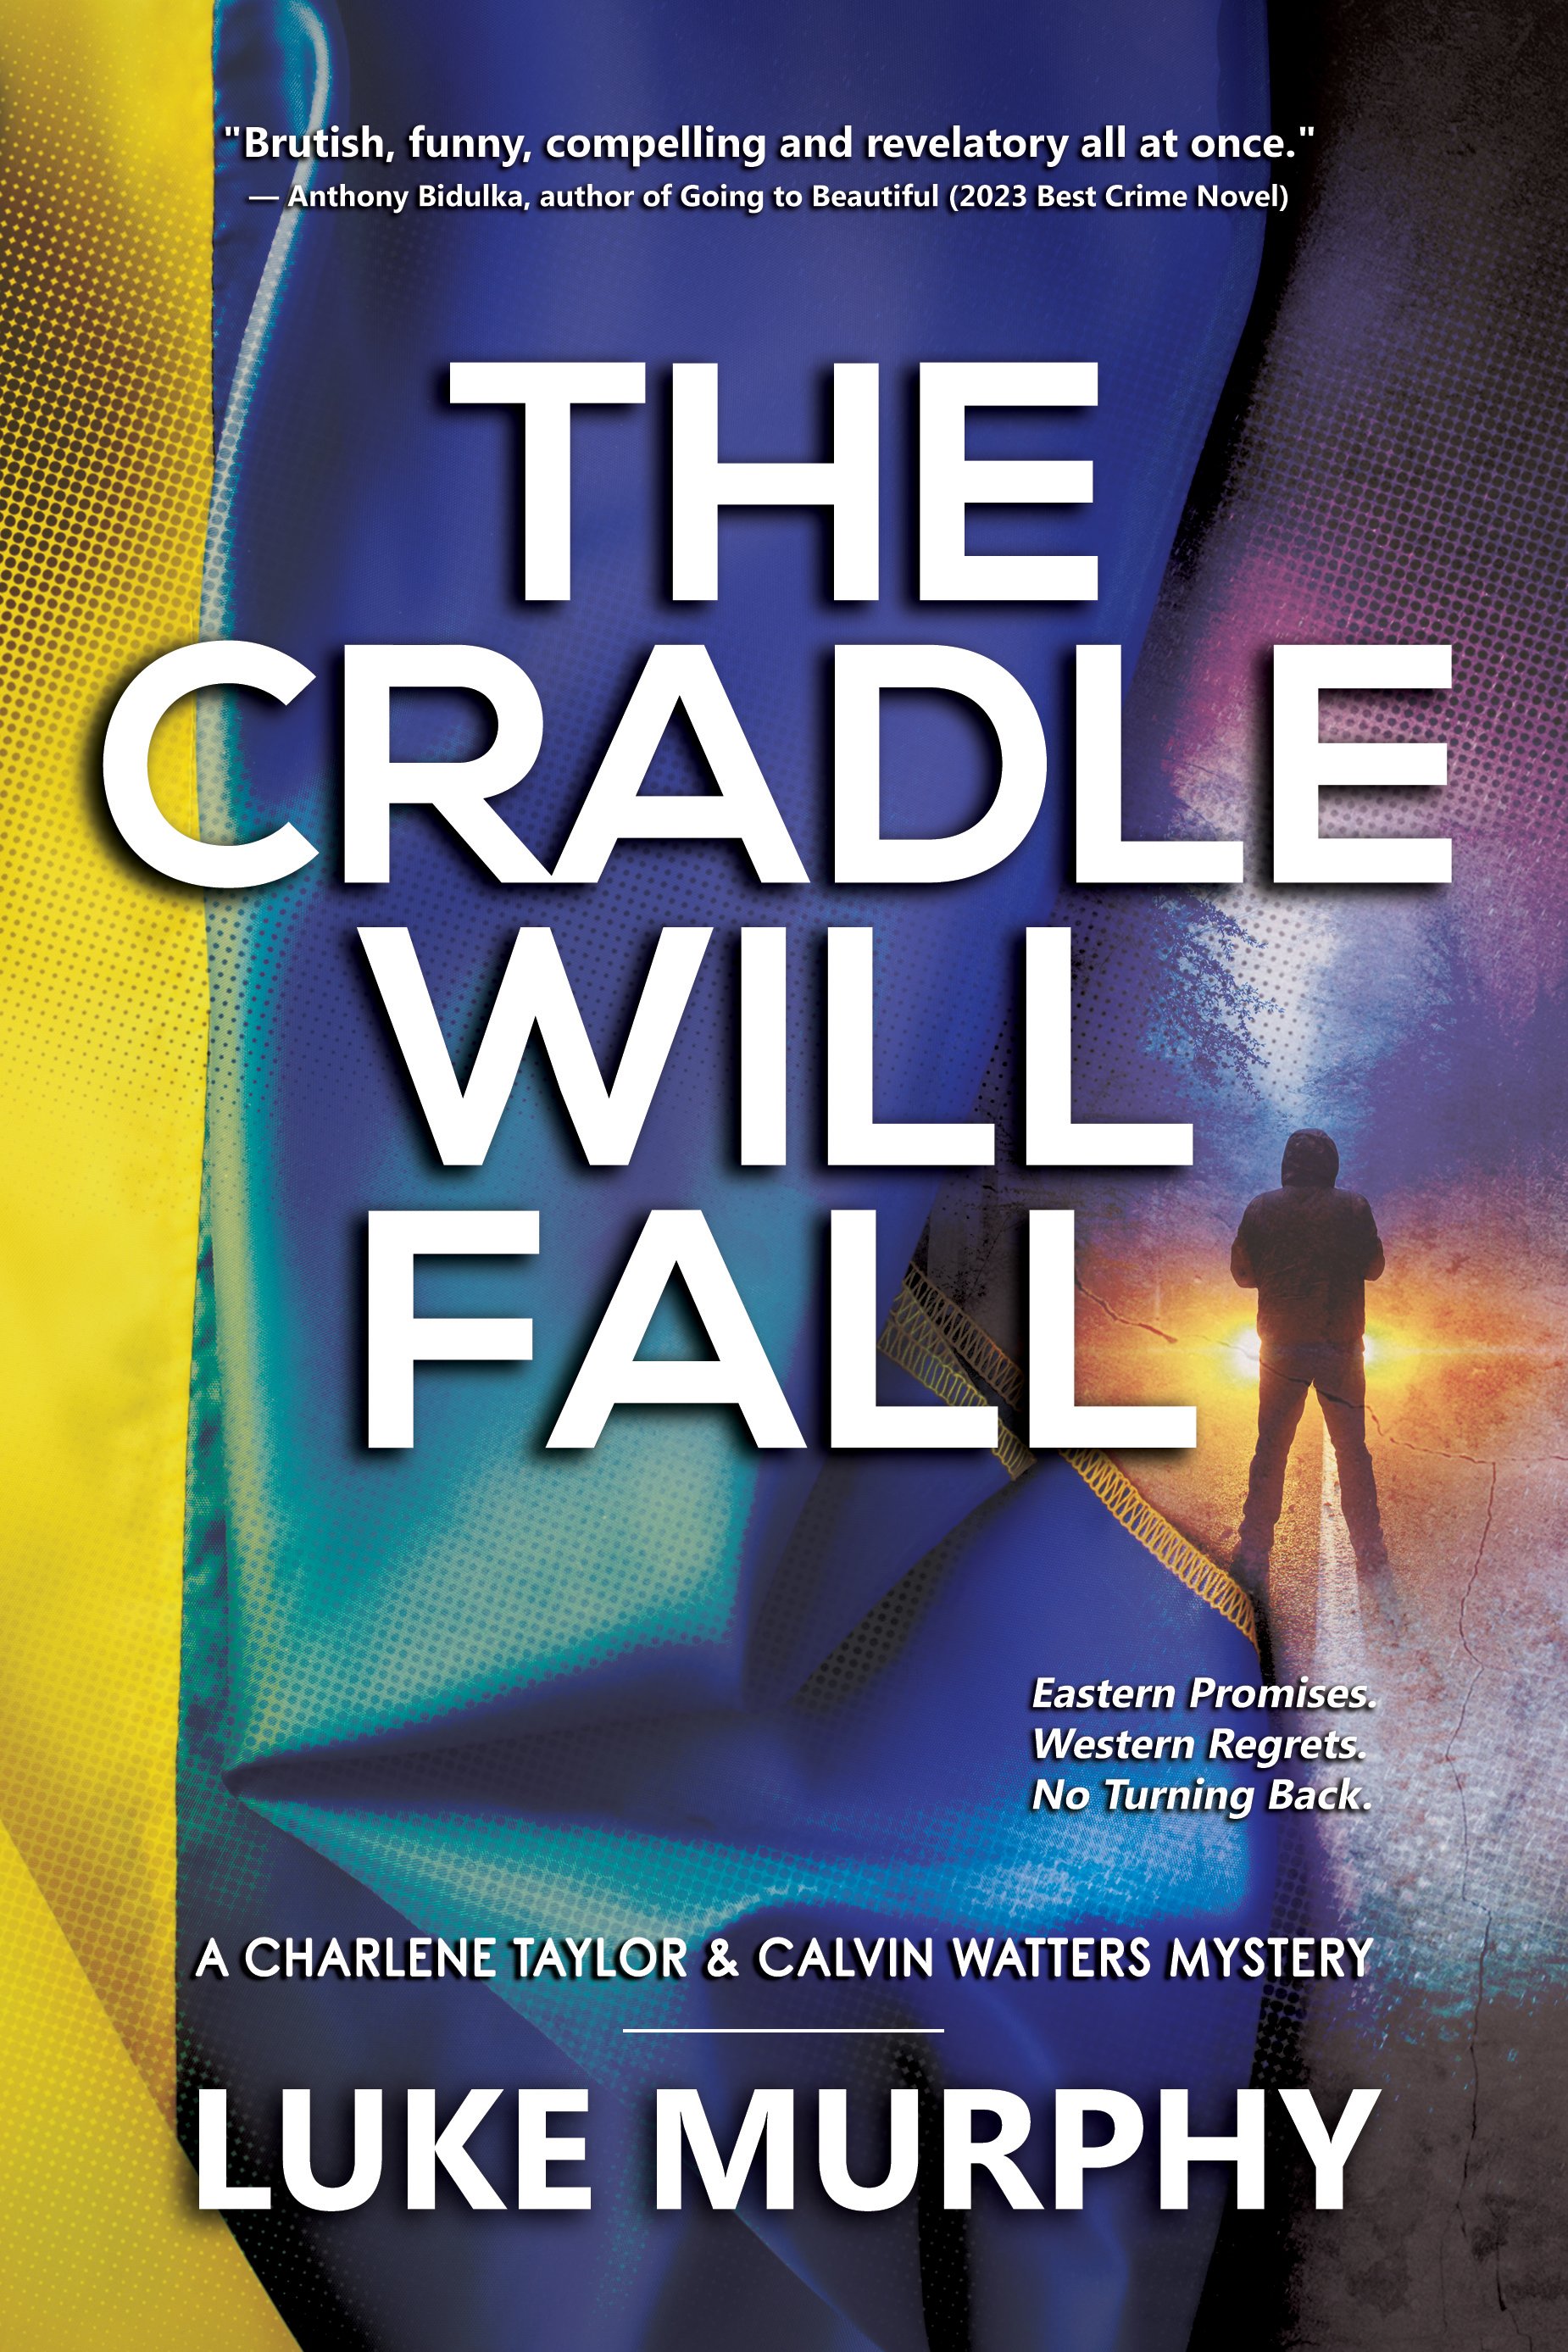 101ca Lukes Book Amazon Layout - The Cradle Will Fall - Final Front Cover (2).jpg (Copy) (Copy) (Copy) (Copy) (Copy) (Copy)